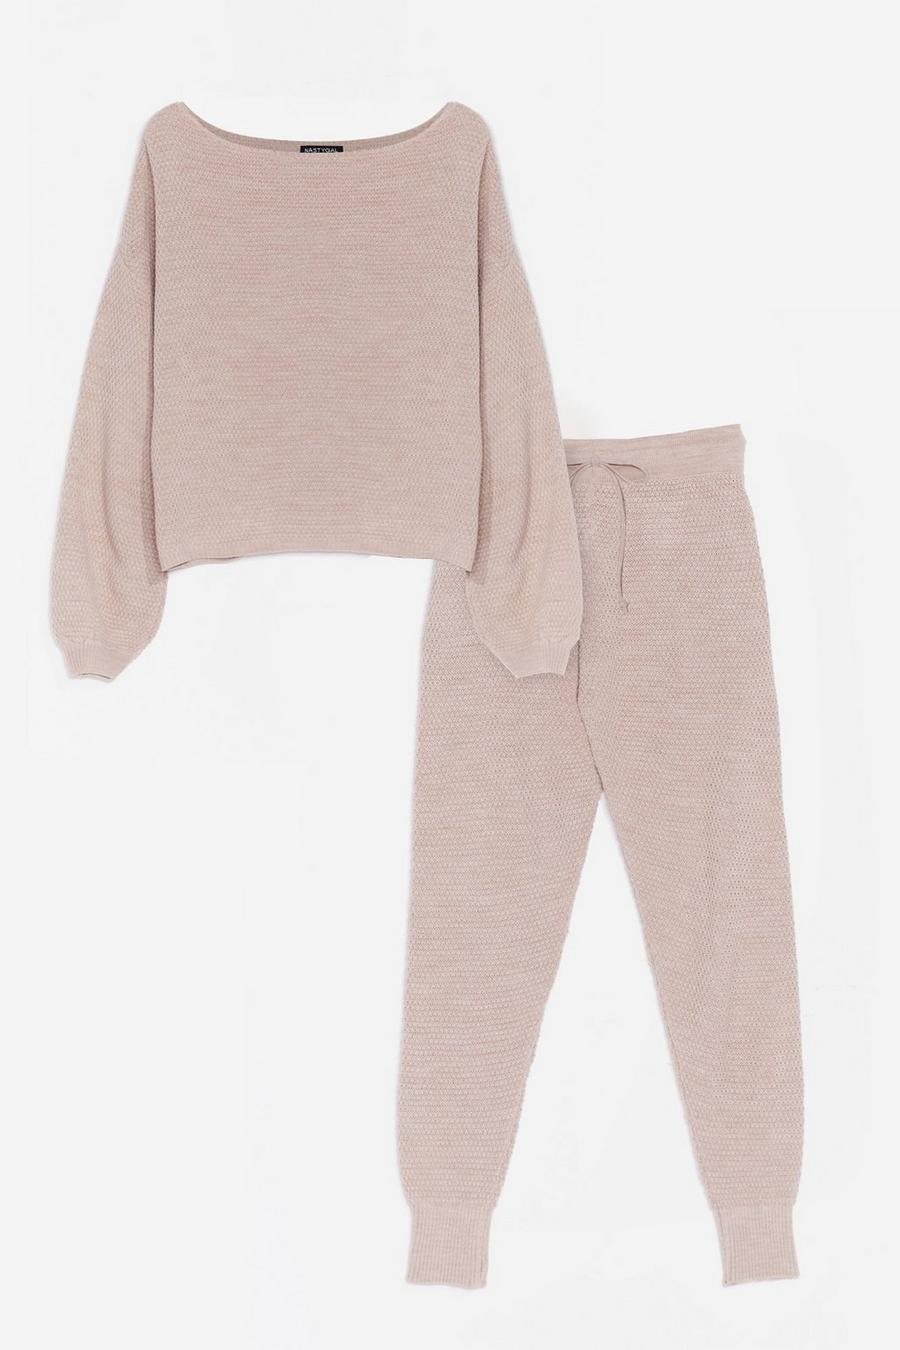 Jumper And Joggers Knitted Loungewear Set